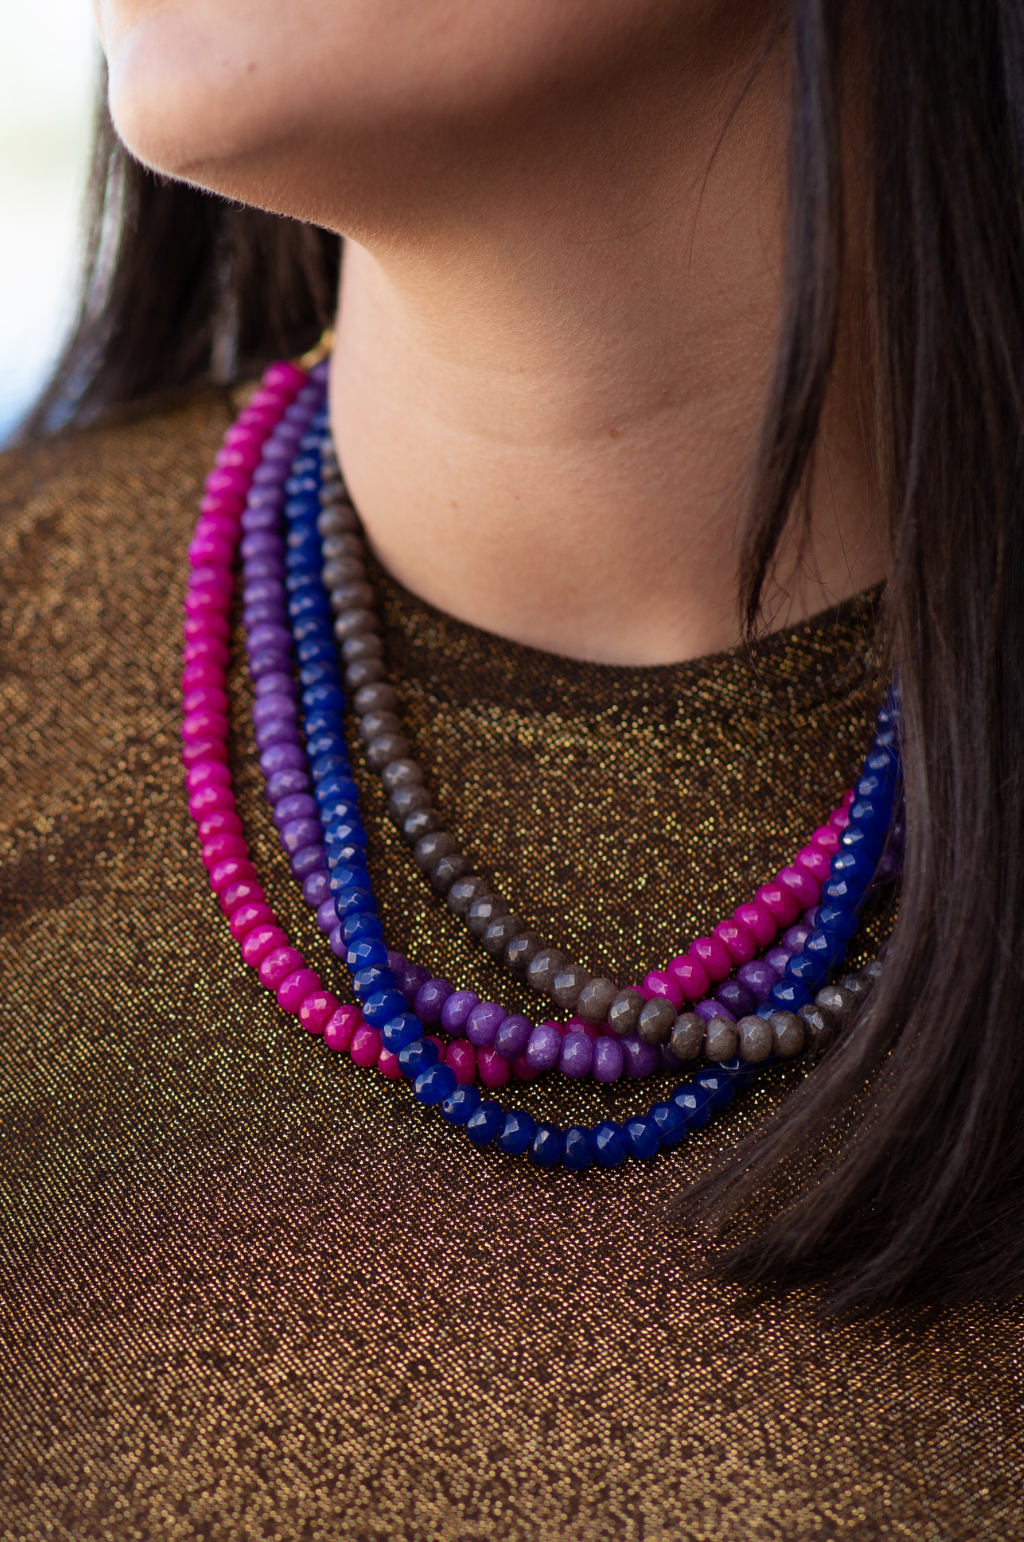 That Big Bead Energy Necklace by Annie Claire Designs - SoSis